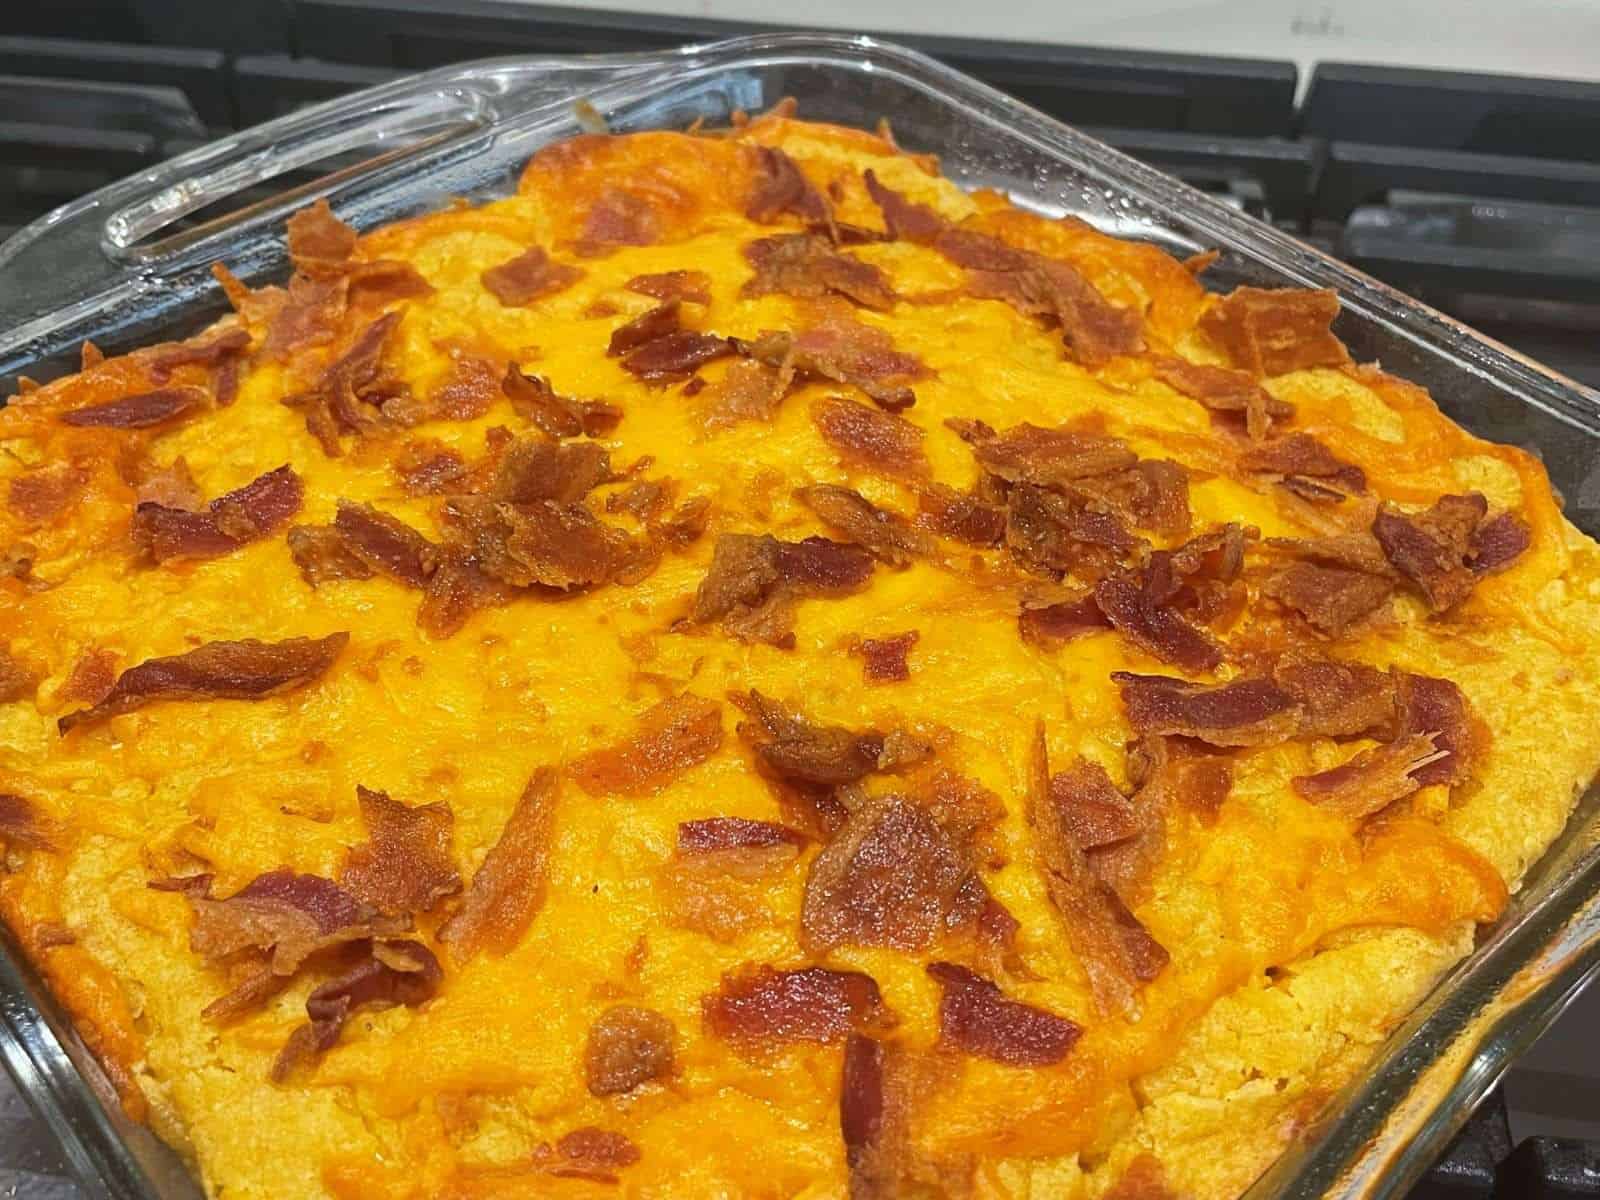 corn casserole topped with cheddar and bacon bits in a pan